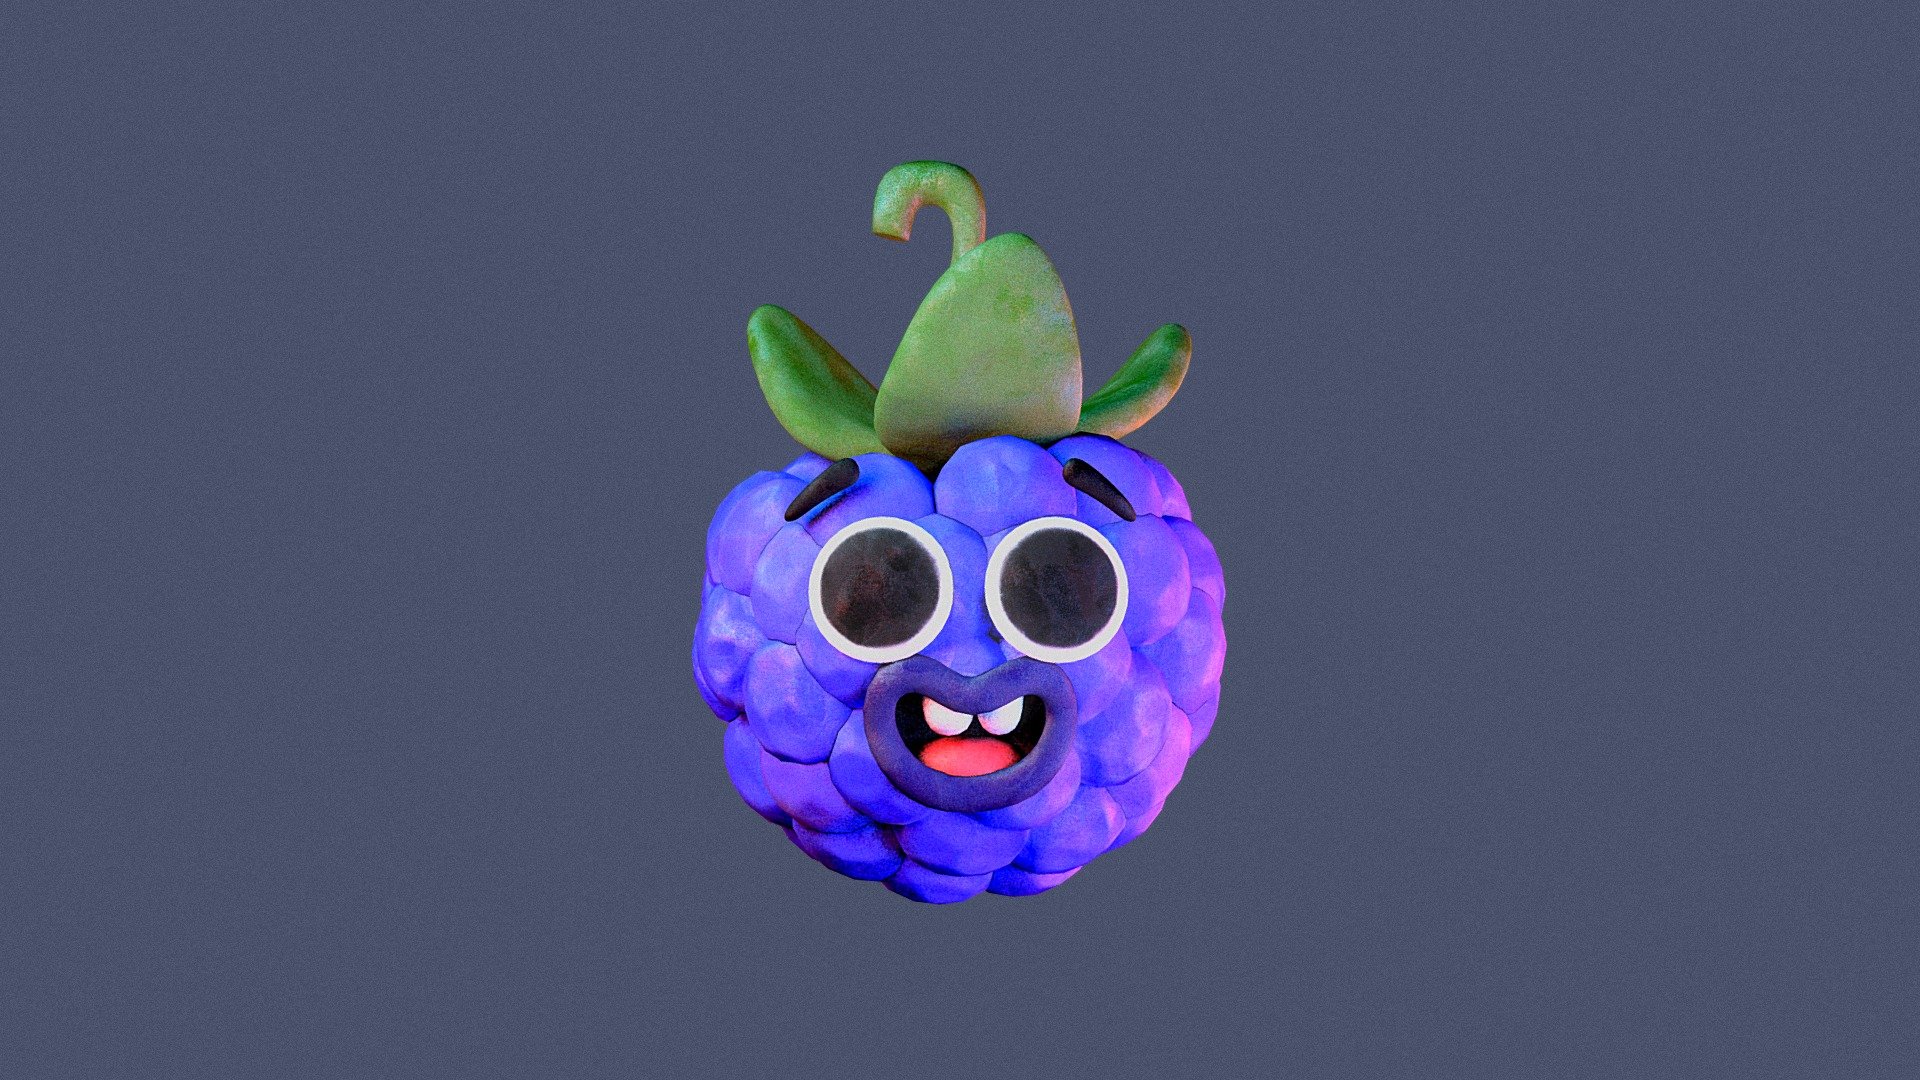 A clay berry created for a sketchfabweekly challenge. Modeled in Blender, textured in 3dcoat 3d model